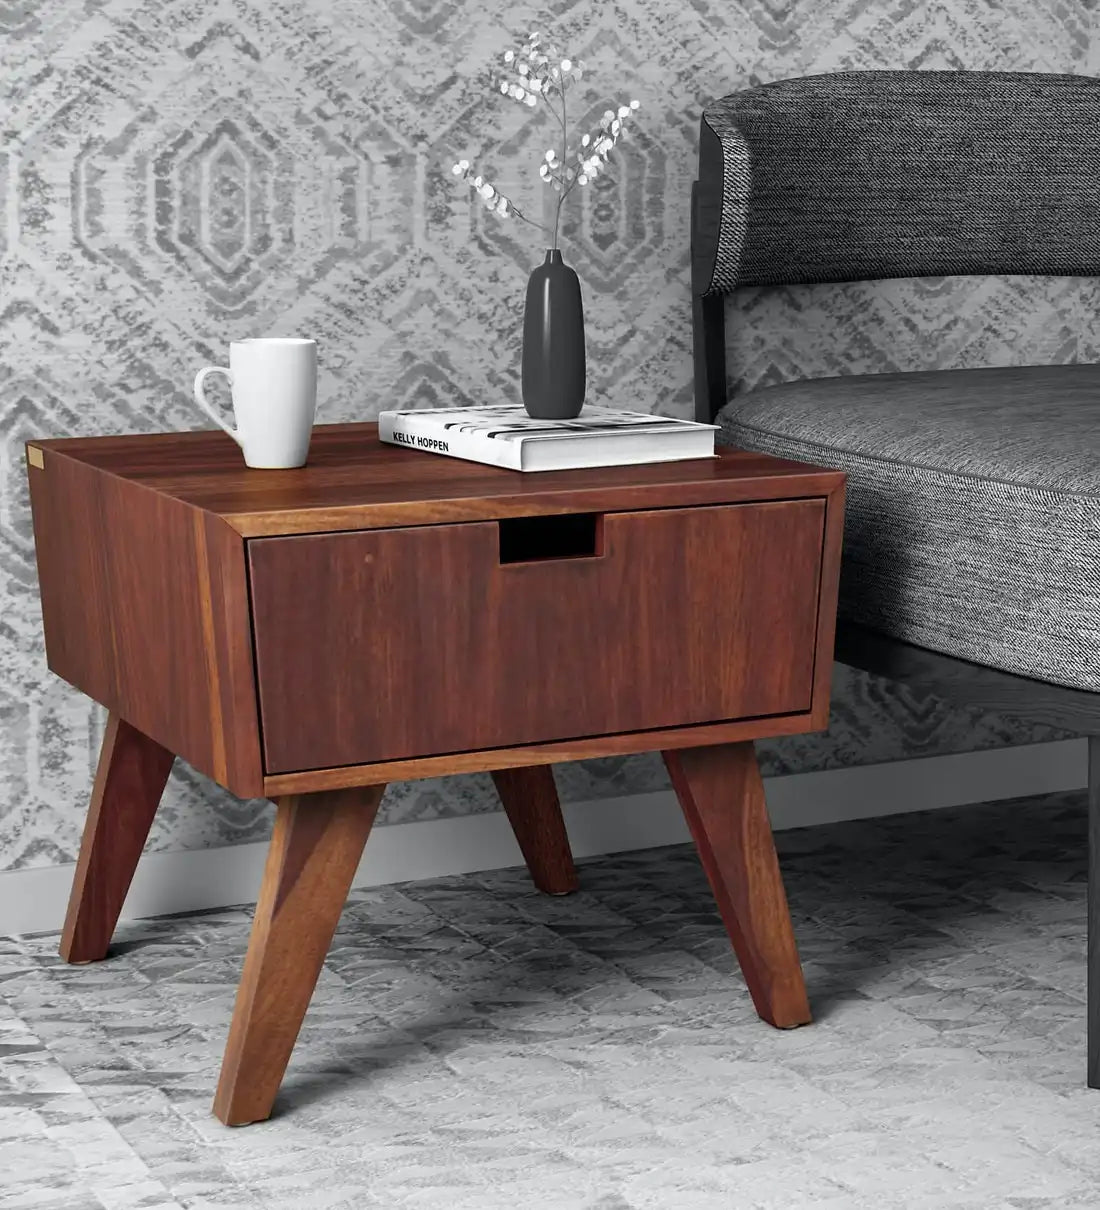 Polremo Wooden End Table with Drawer